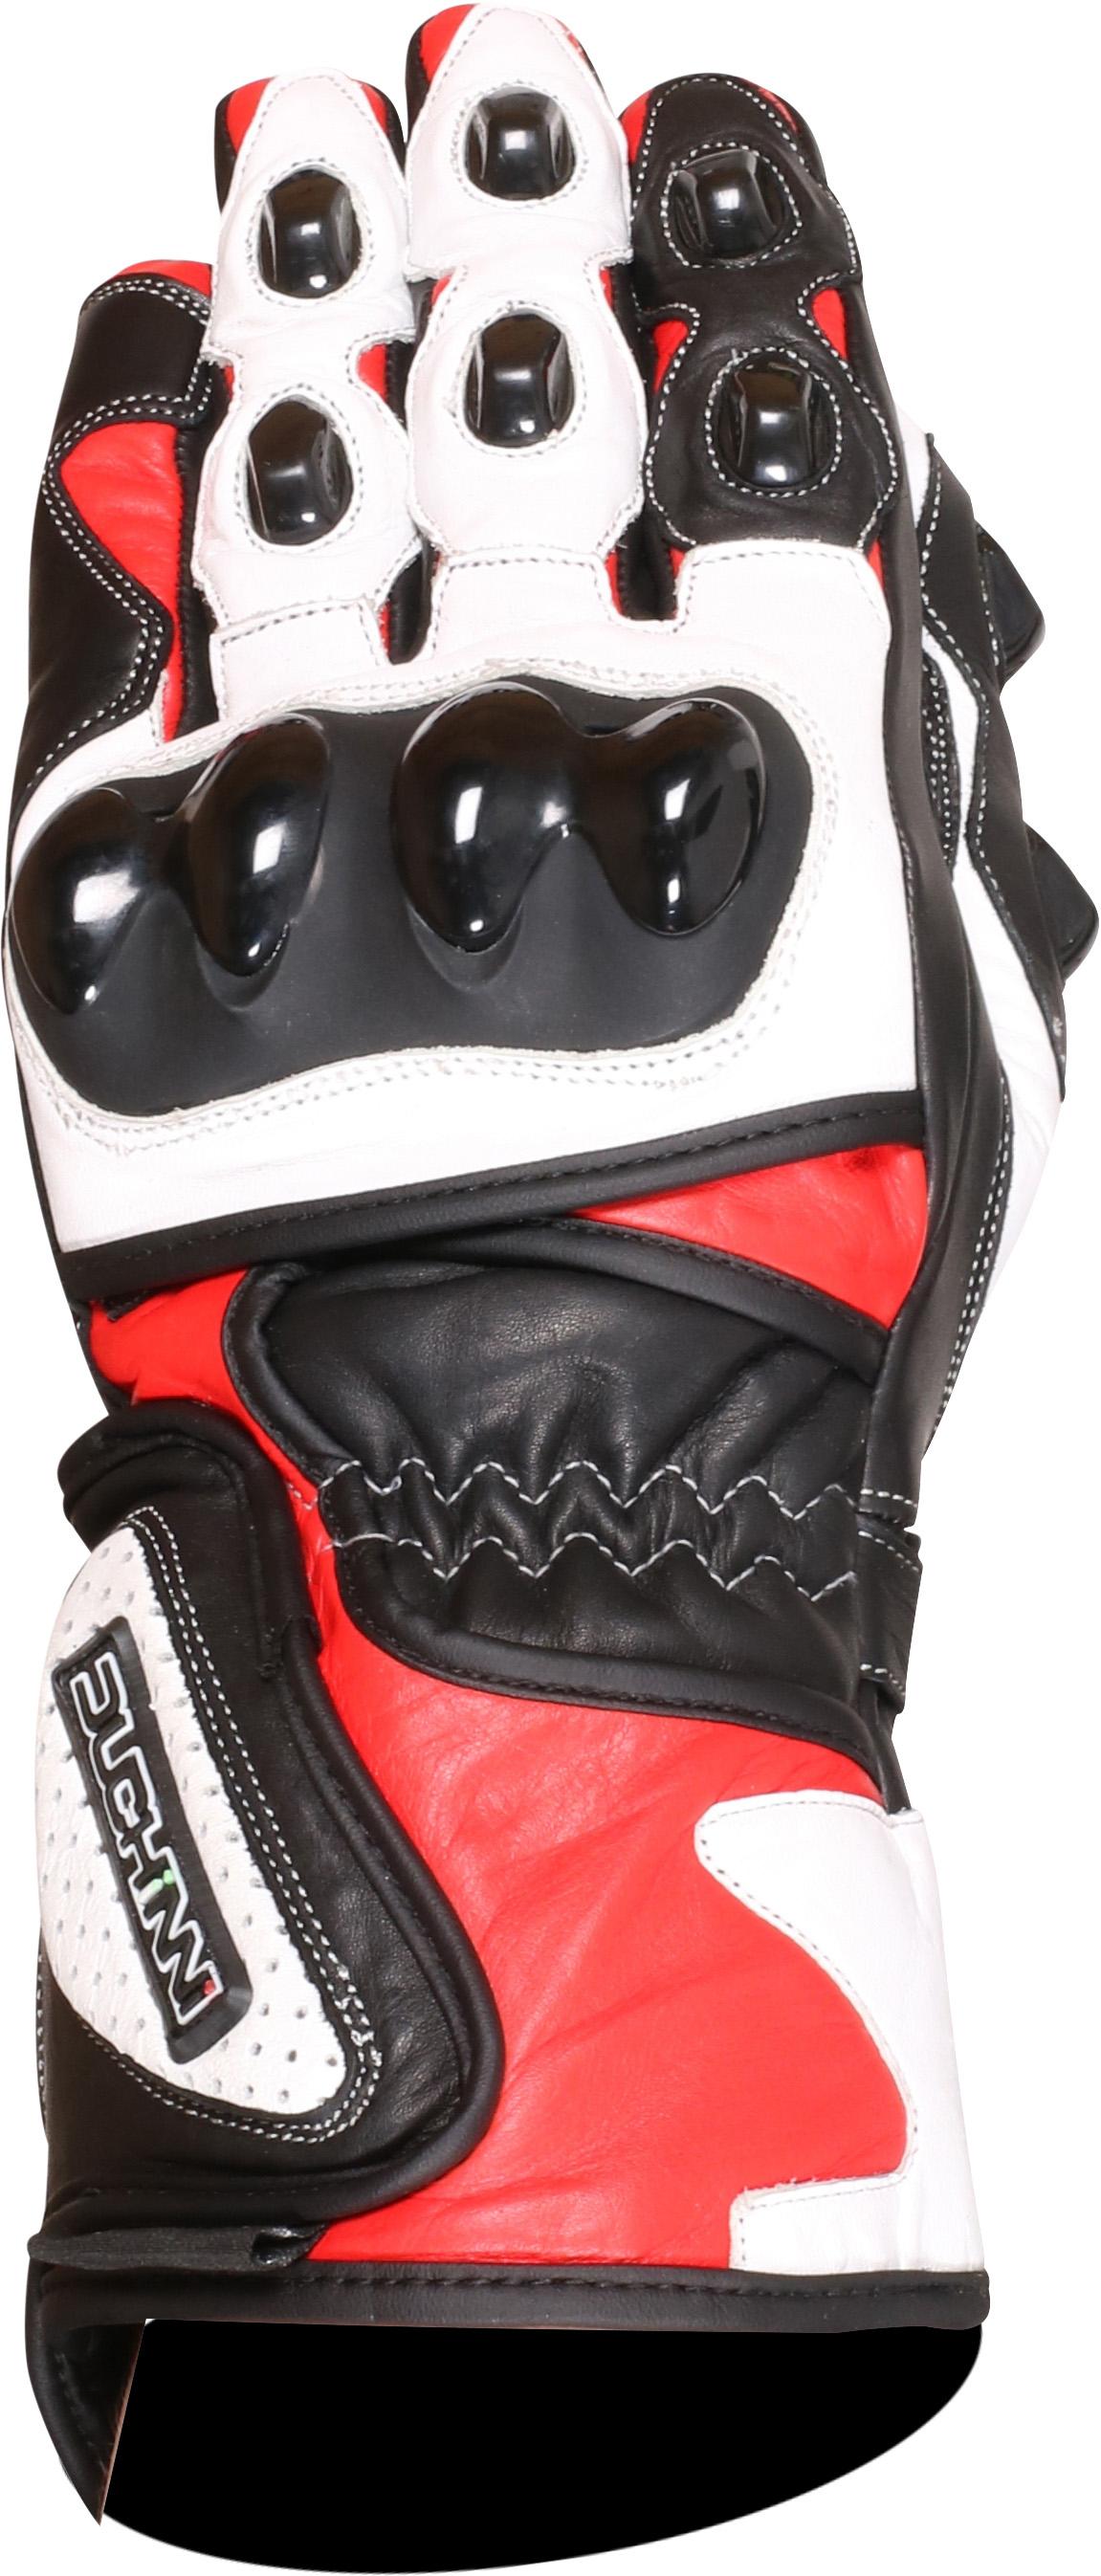 Duchinni Dr1 Motorcycle Gloves - Black And Red, S